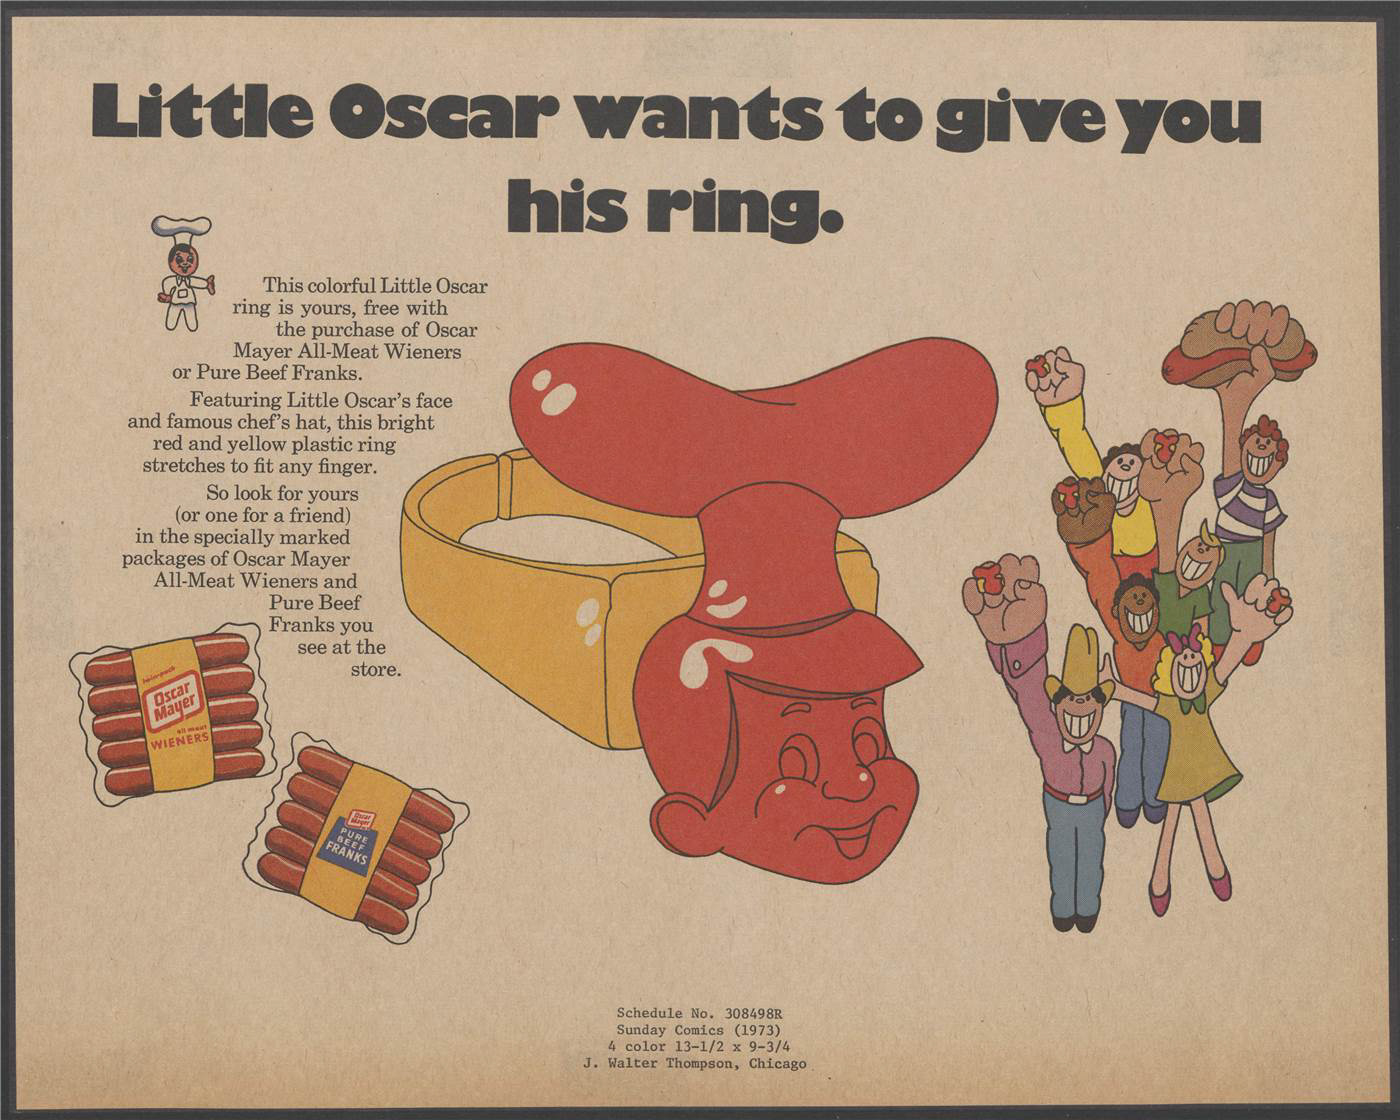 "Little Oscar wants to give you his ring." Artwork of a ring with the face of Little Oscar with a sausage on his head on it, and people wearing their rings. Text states that the ring comes free with the product.